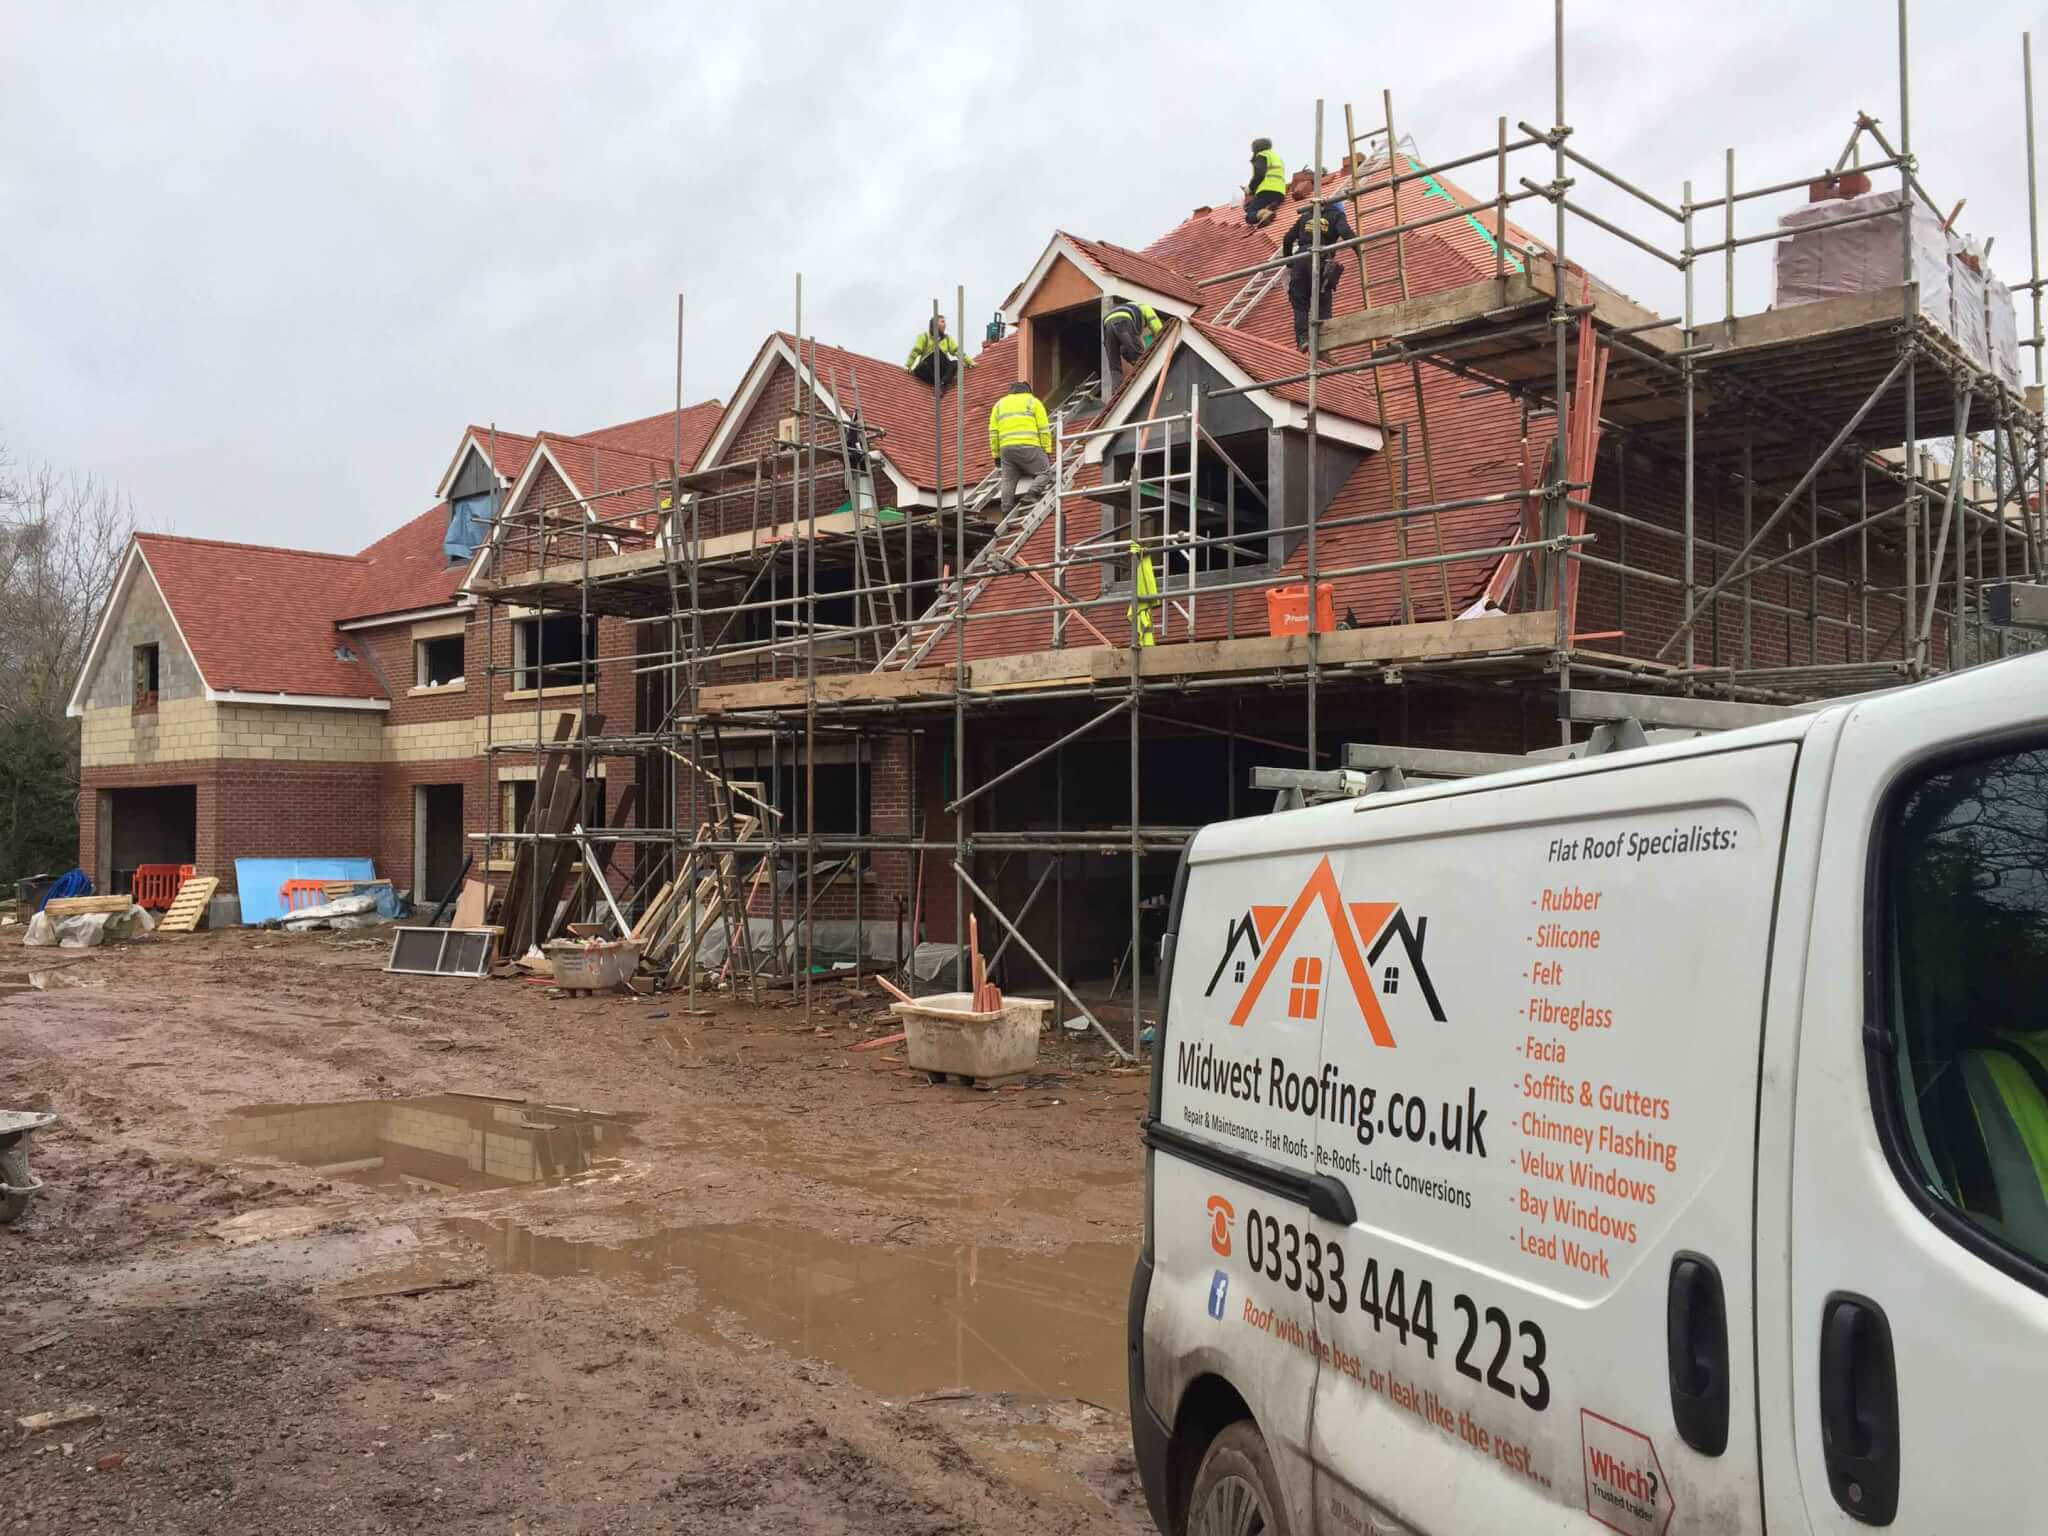 Professional Roofers in Wolverhampton & Birmingham - Midwest Roofing